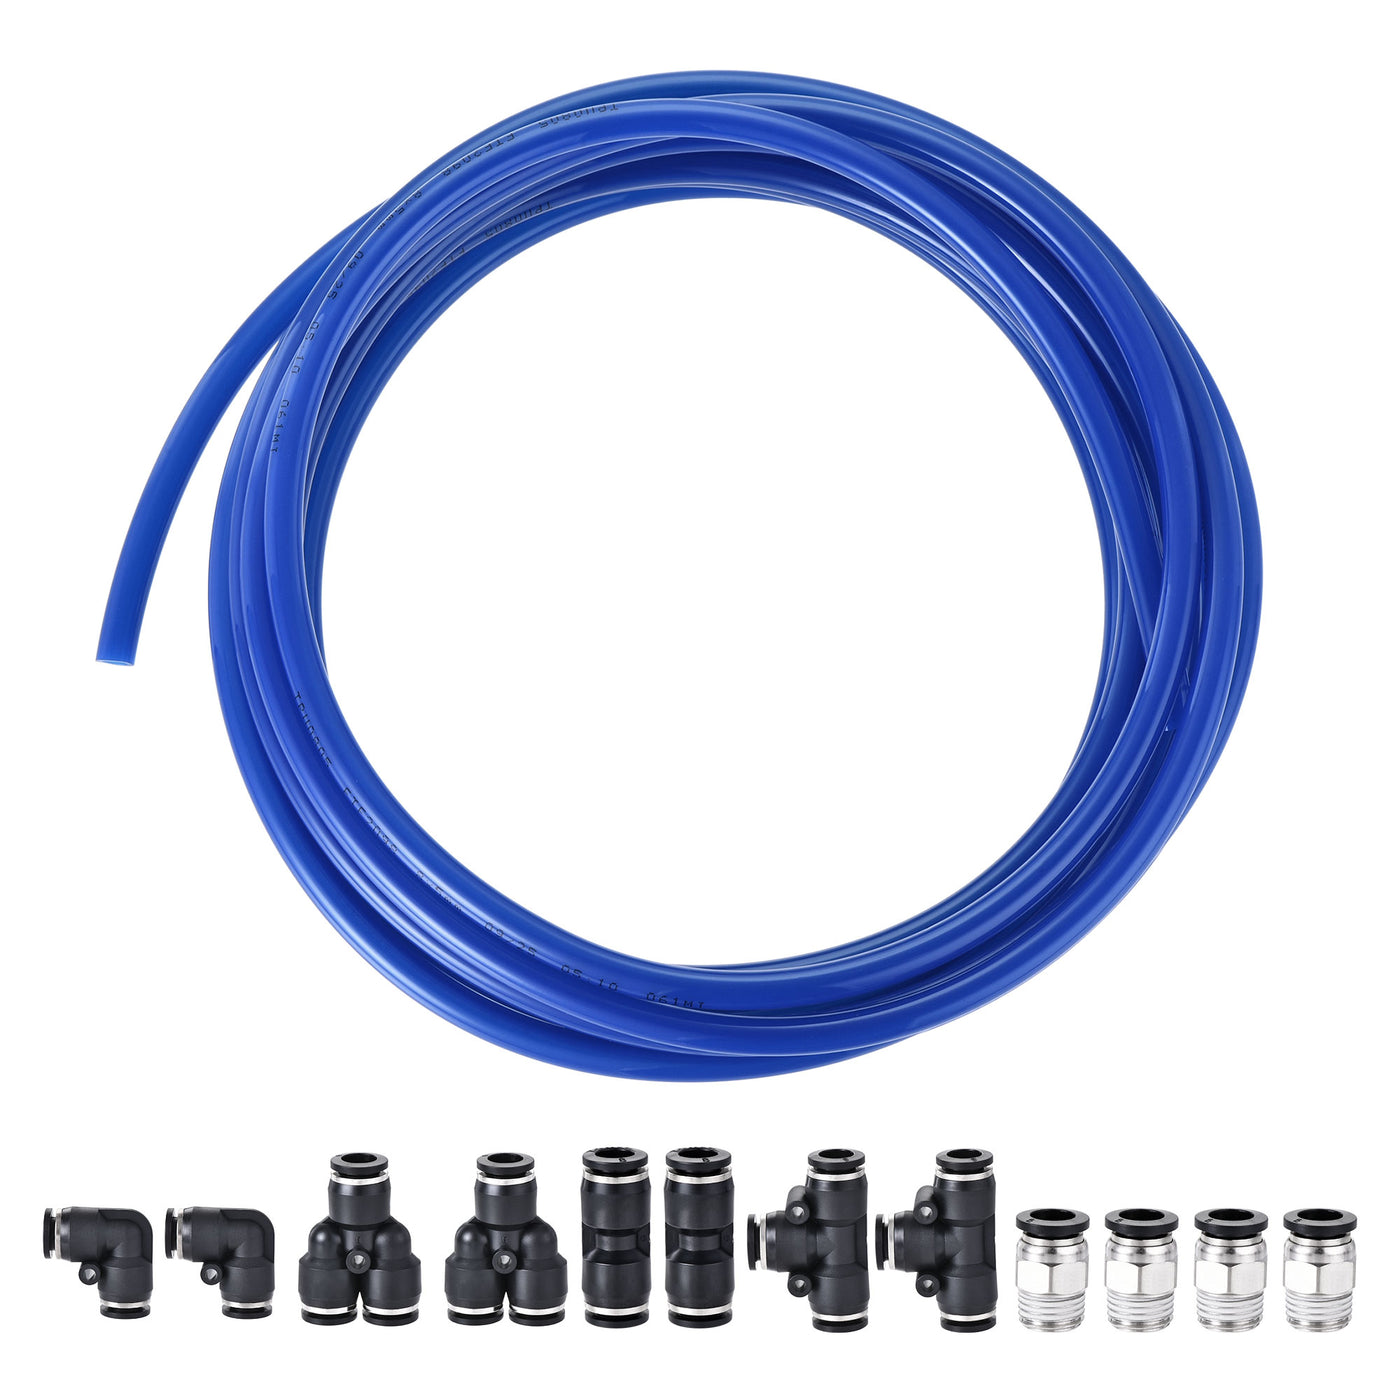 uxcell Uxcell Pneumatic 8mm OD PU Air Hose Tubing Kit 5 Meters Blue with 12 Pcs Push to Connect Fittings